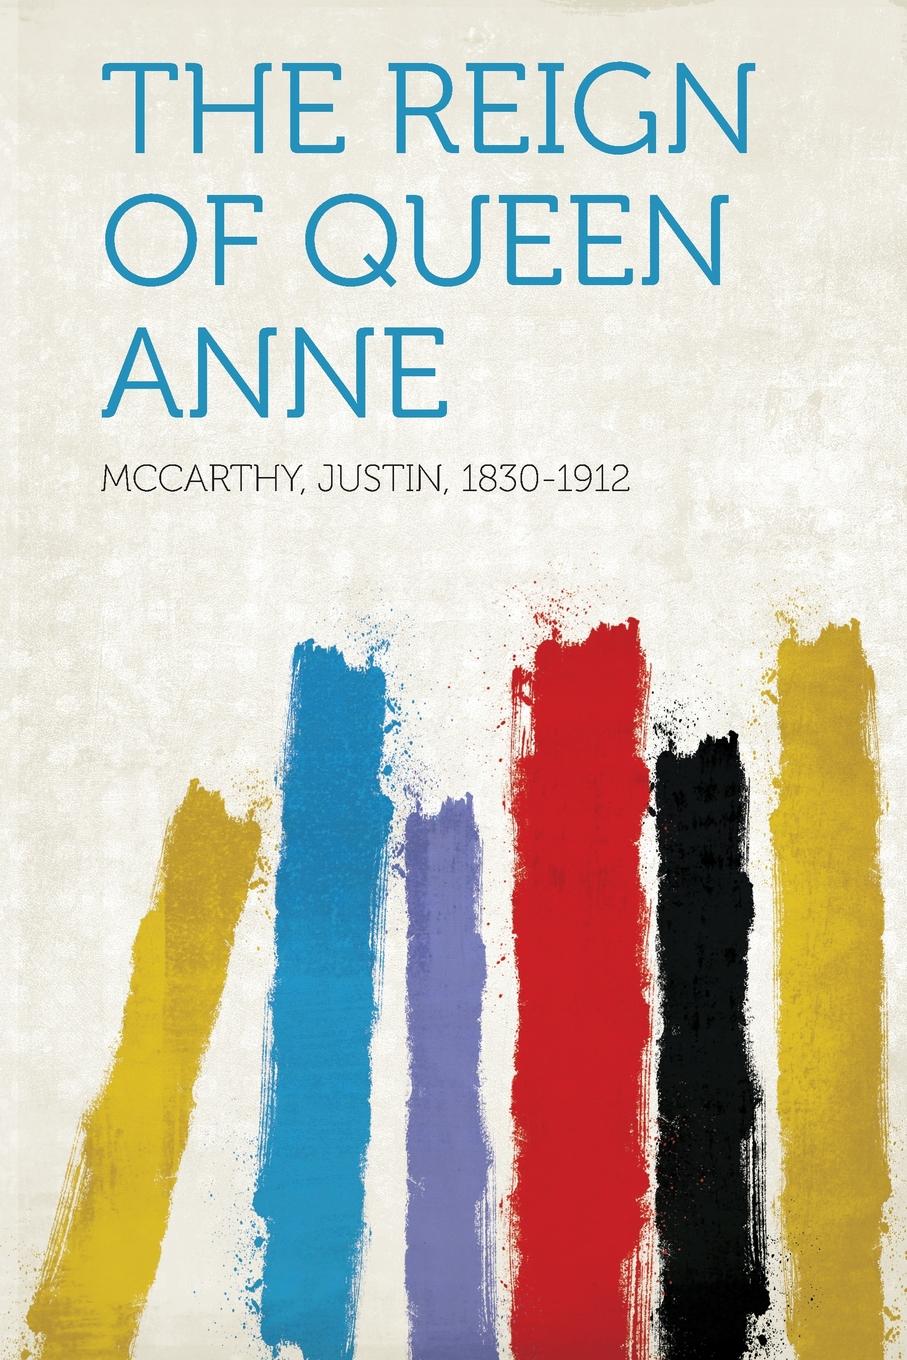 The Reign of Queen Anne